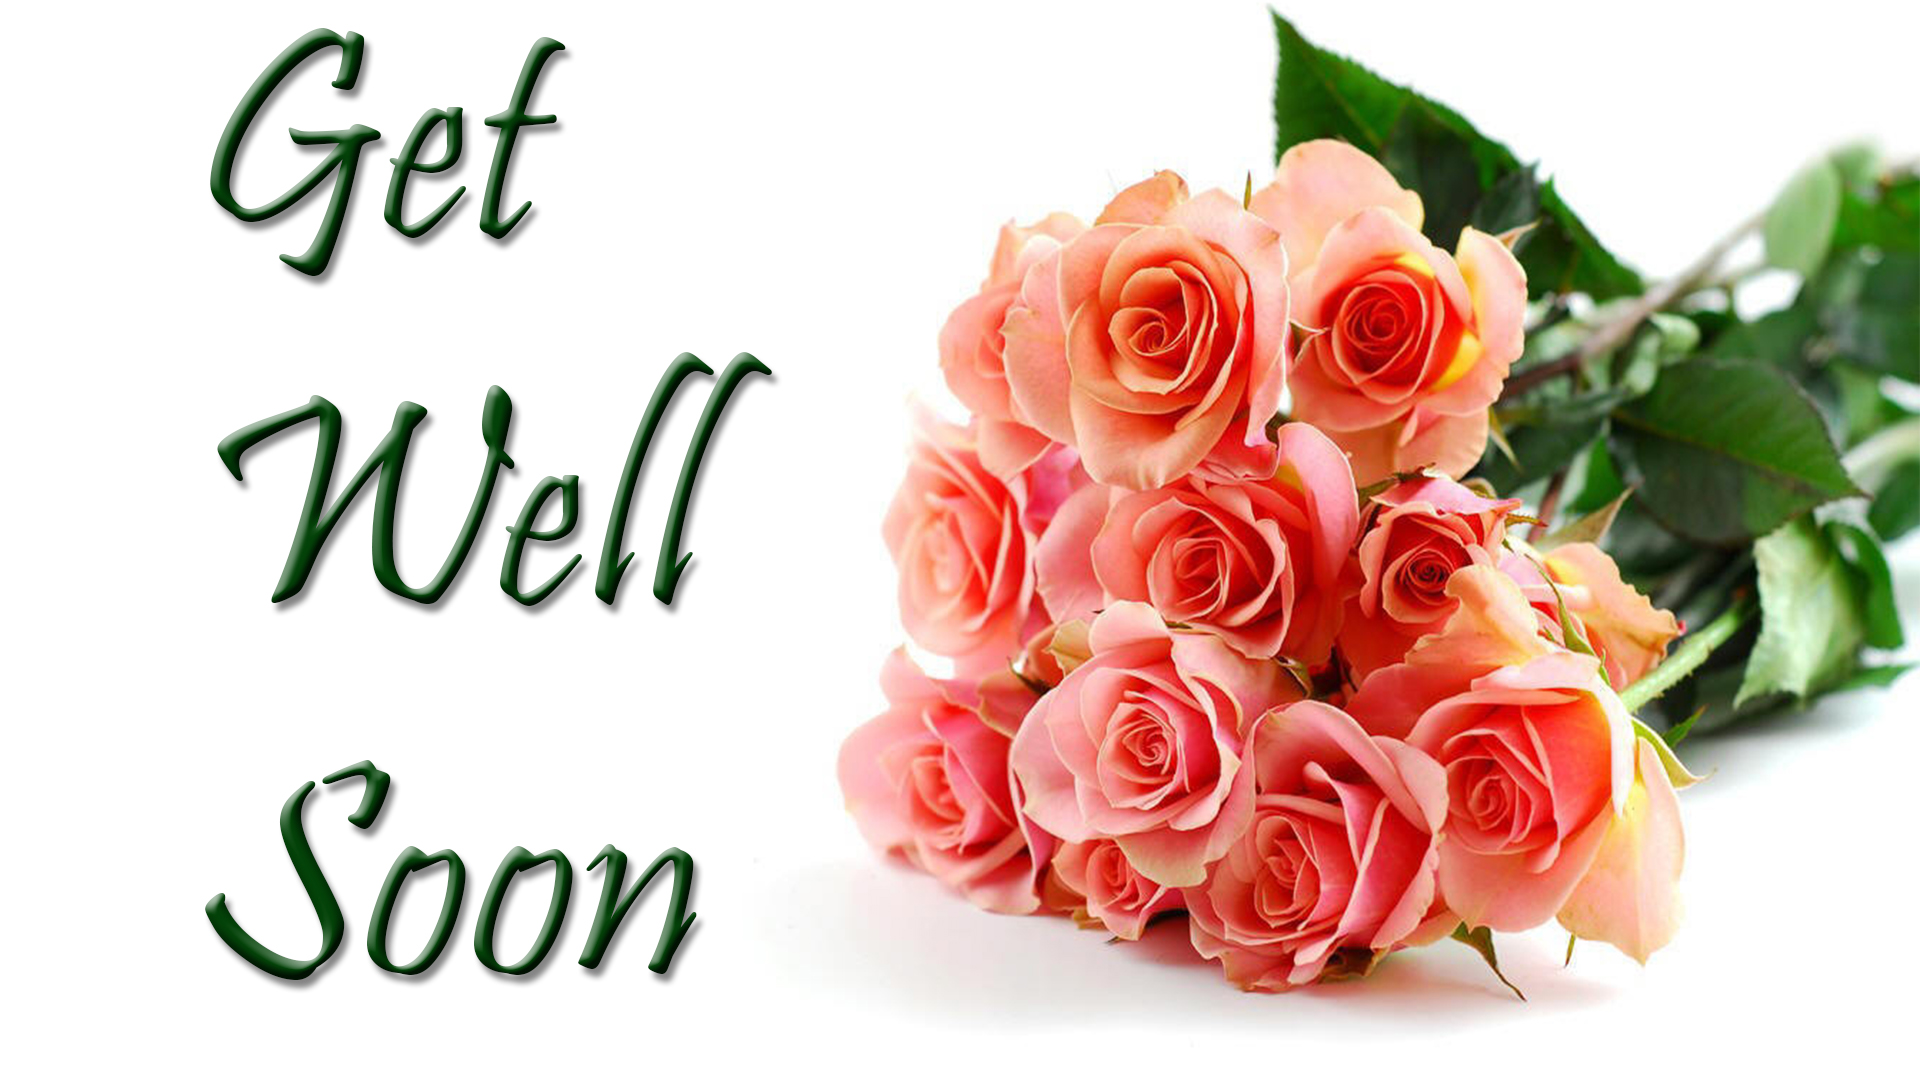 get well soon picture